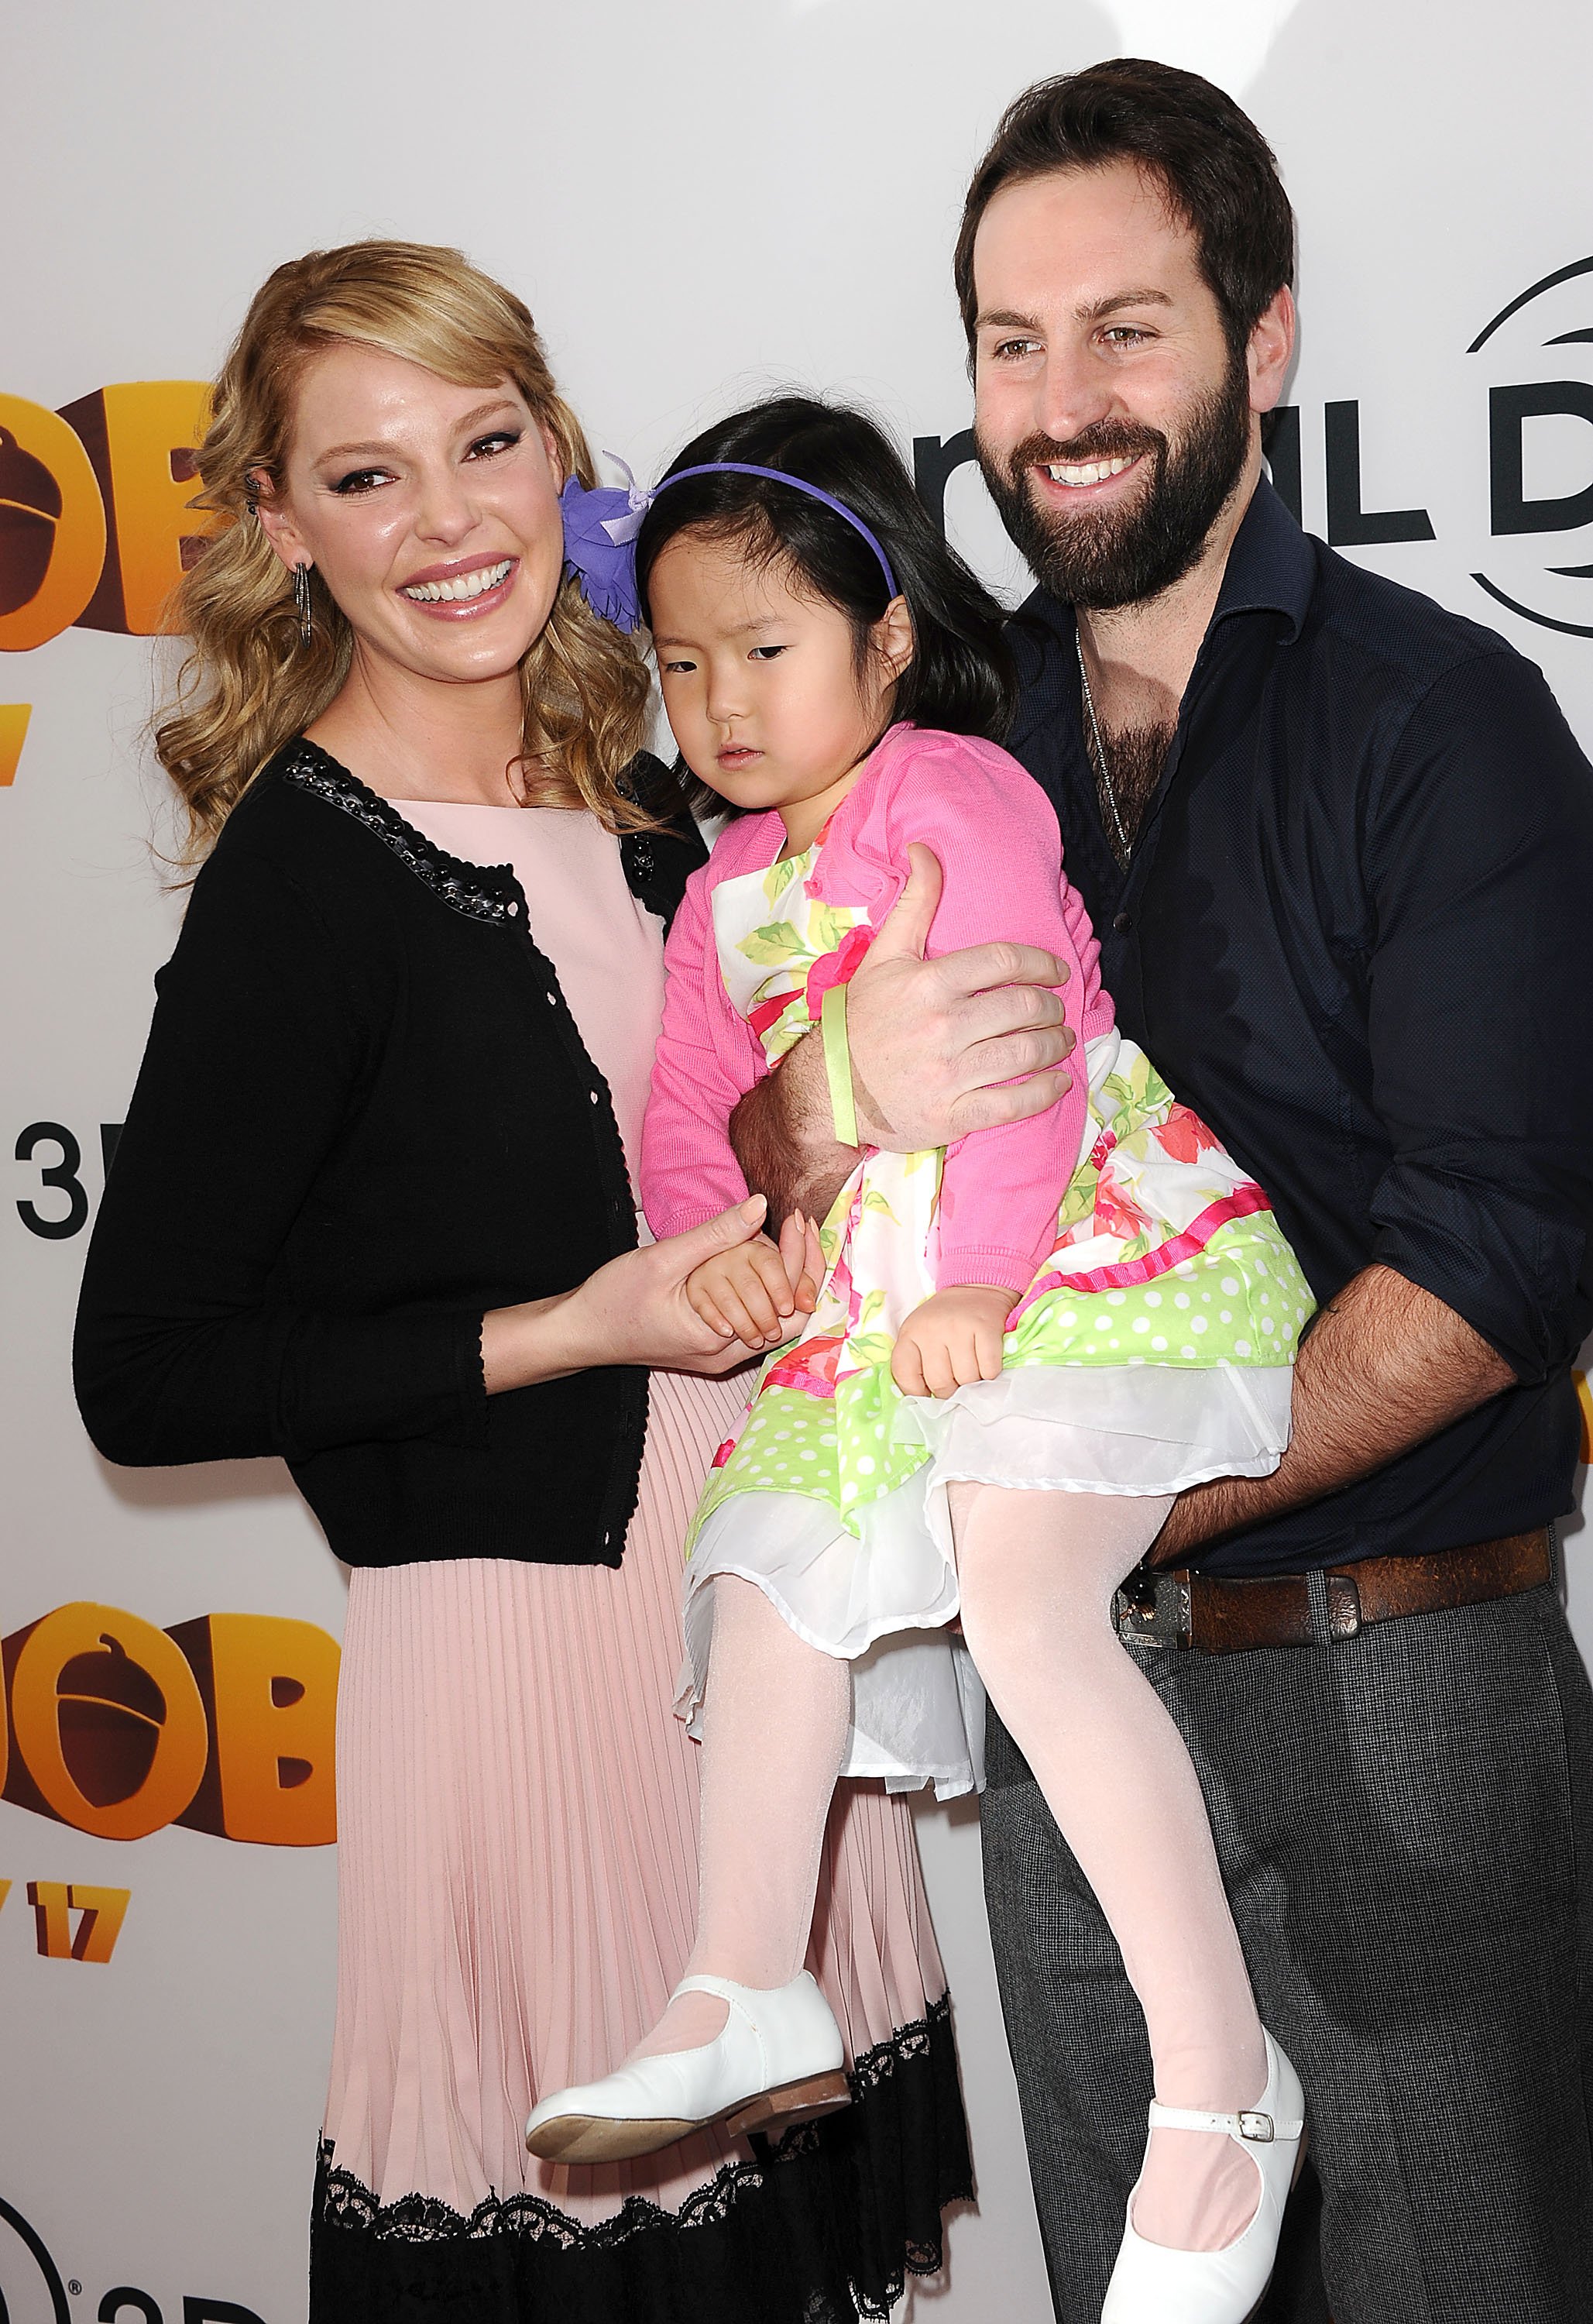 Katherine Heigl, Josh Kelley and Nancy Leigh attend the premiere of "The Nut Job" at Regal Cinemas L.A. Live in Los Angeles, California on January 11, 2014. | Source: Getty Images